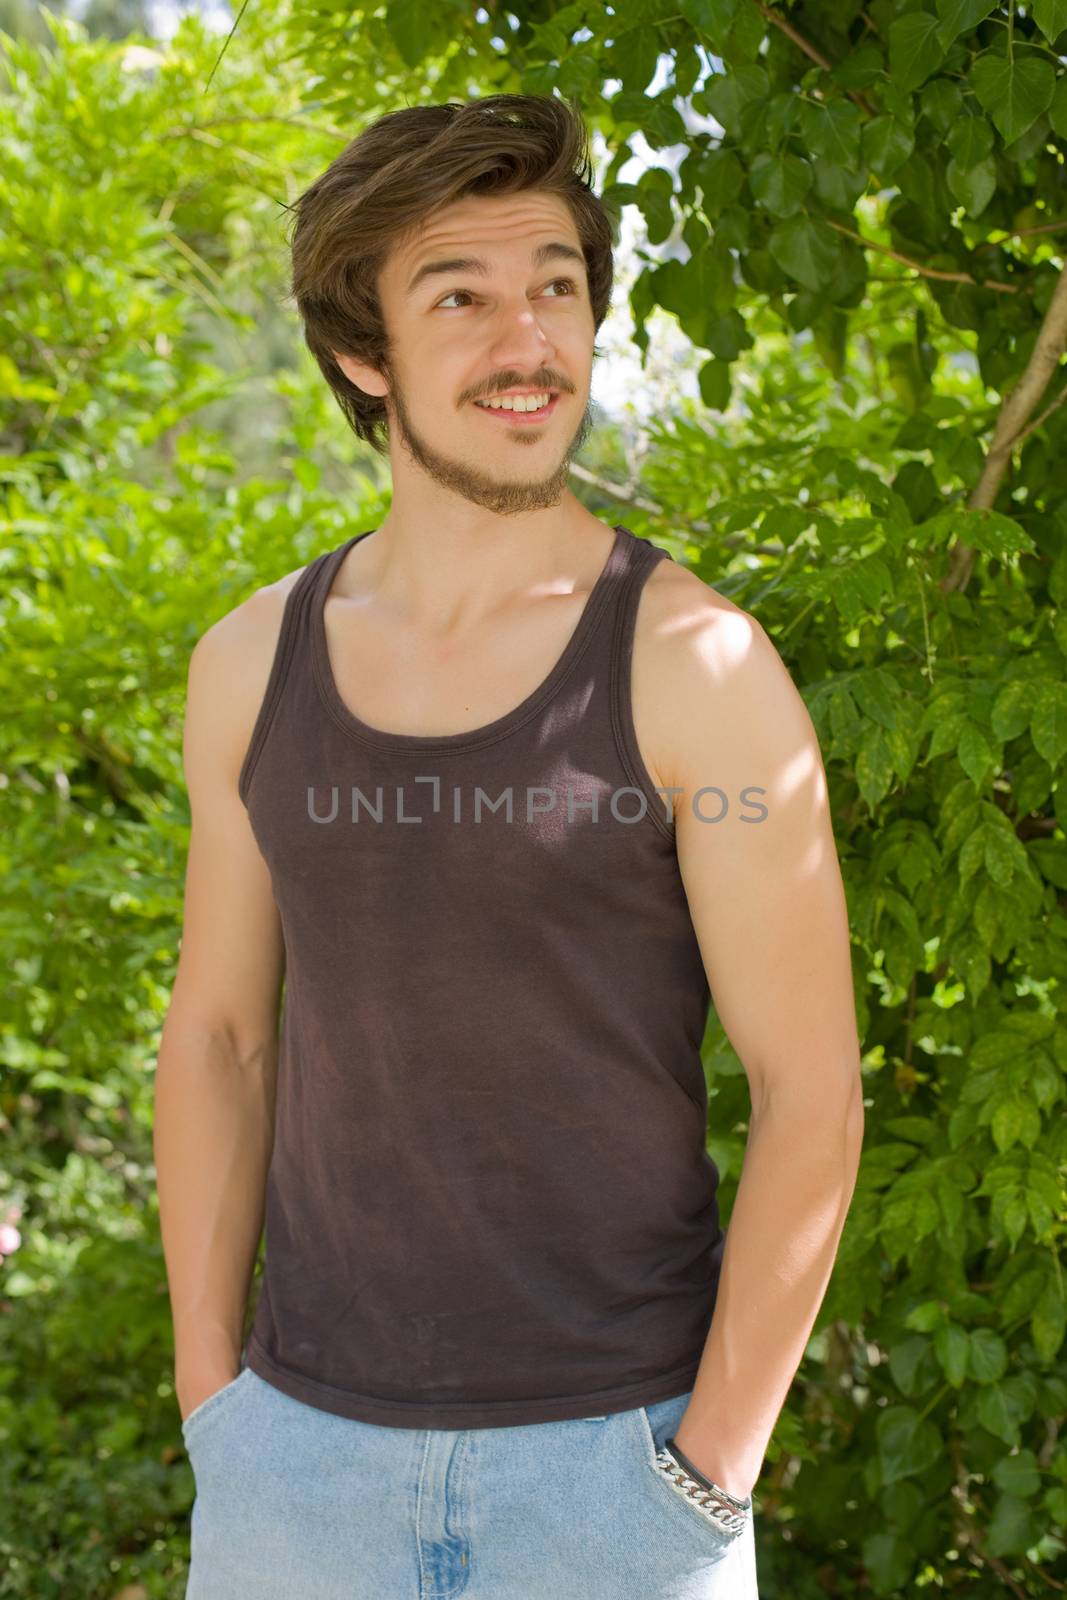 portrait of happy handsome young man, summer outdoors.